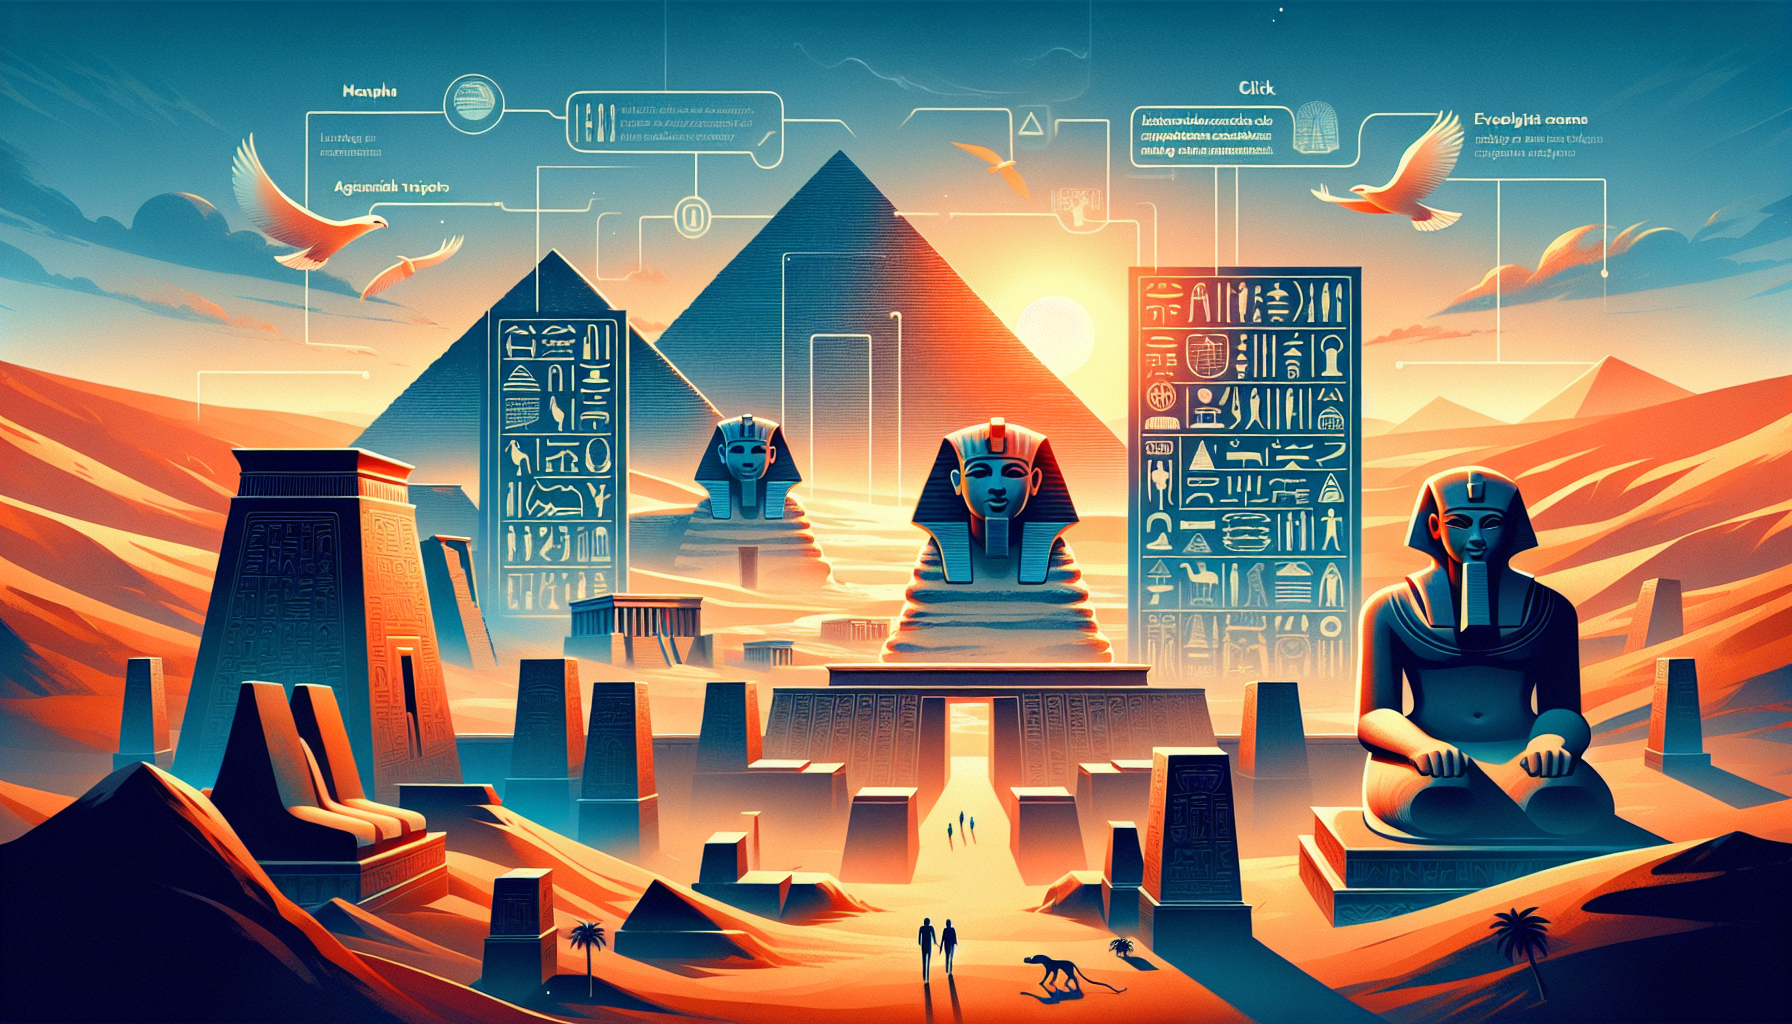 explore the role of memphis in unraveling egypt's ancient puzzles and mysteries. discover how this ancient city holds the key to unlocking the secrets of egypt's enigmatic past.